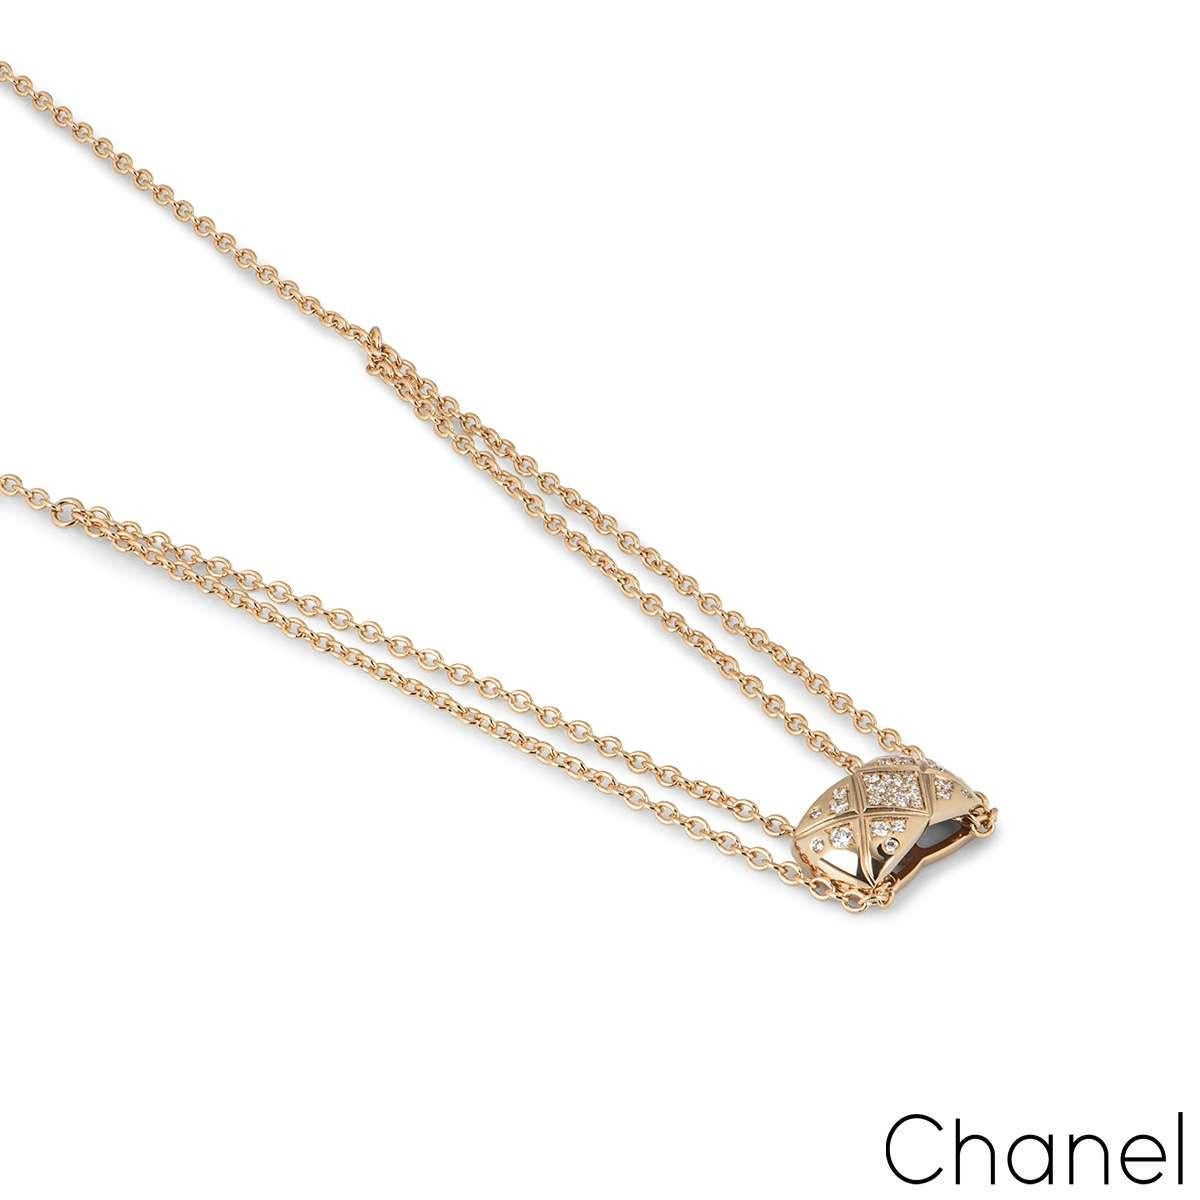 Chanel Coco Crush Necklace Quilted Motif, 18k Yellow Gold, Diamonds J12103  - JewelryReluxe